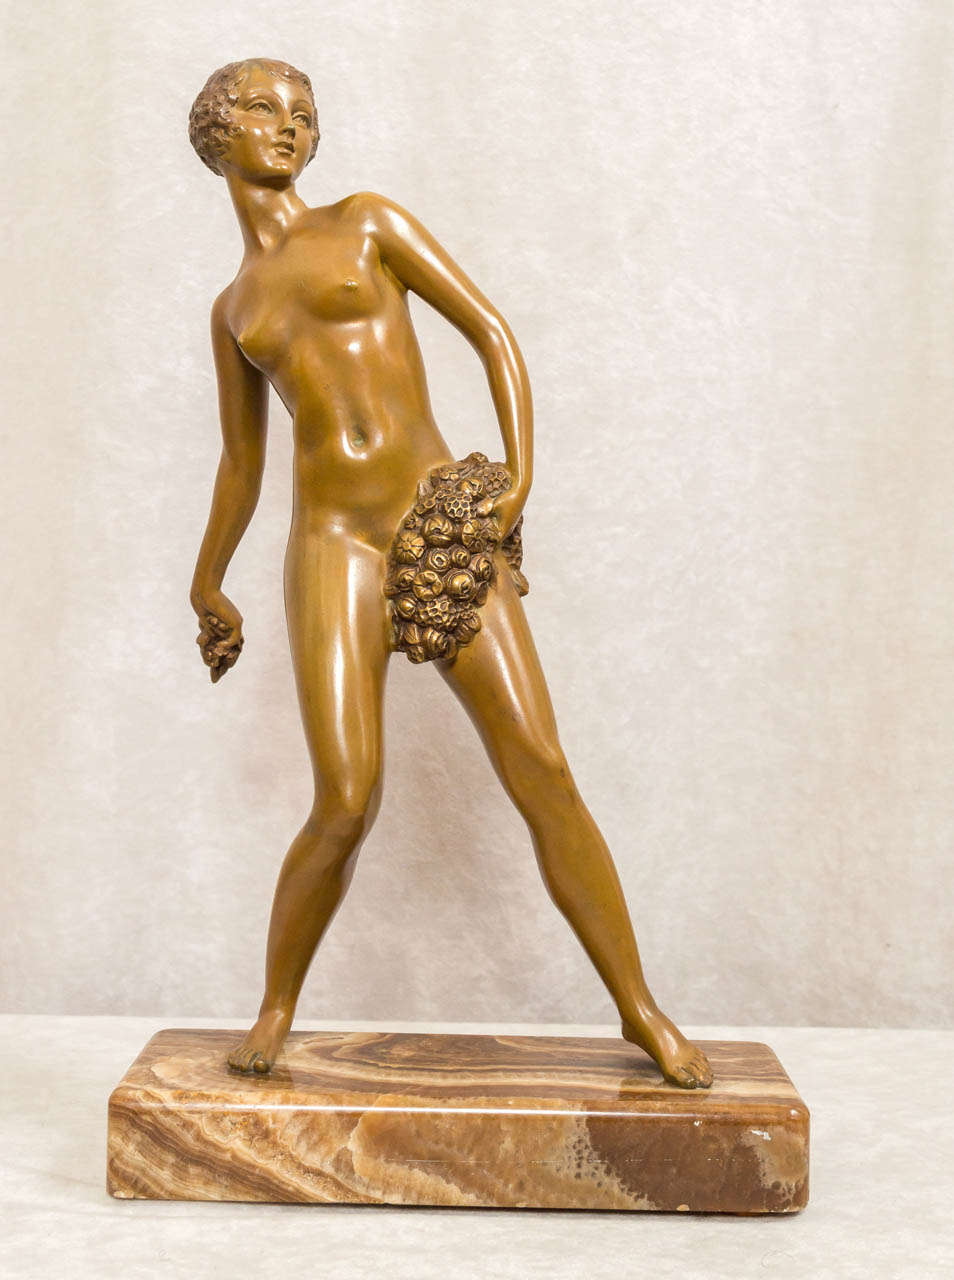 This extremely well executed figure of a nude is candy for the eyes.  The patina is a rich greenish brown and is in remarkable condition.  She has a beautiful face with the finest detailing to include her hair, lips, etc.  It is mounted on a rich